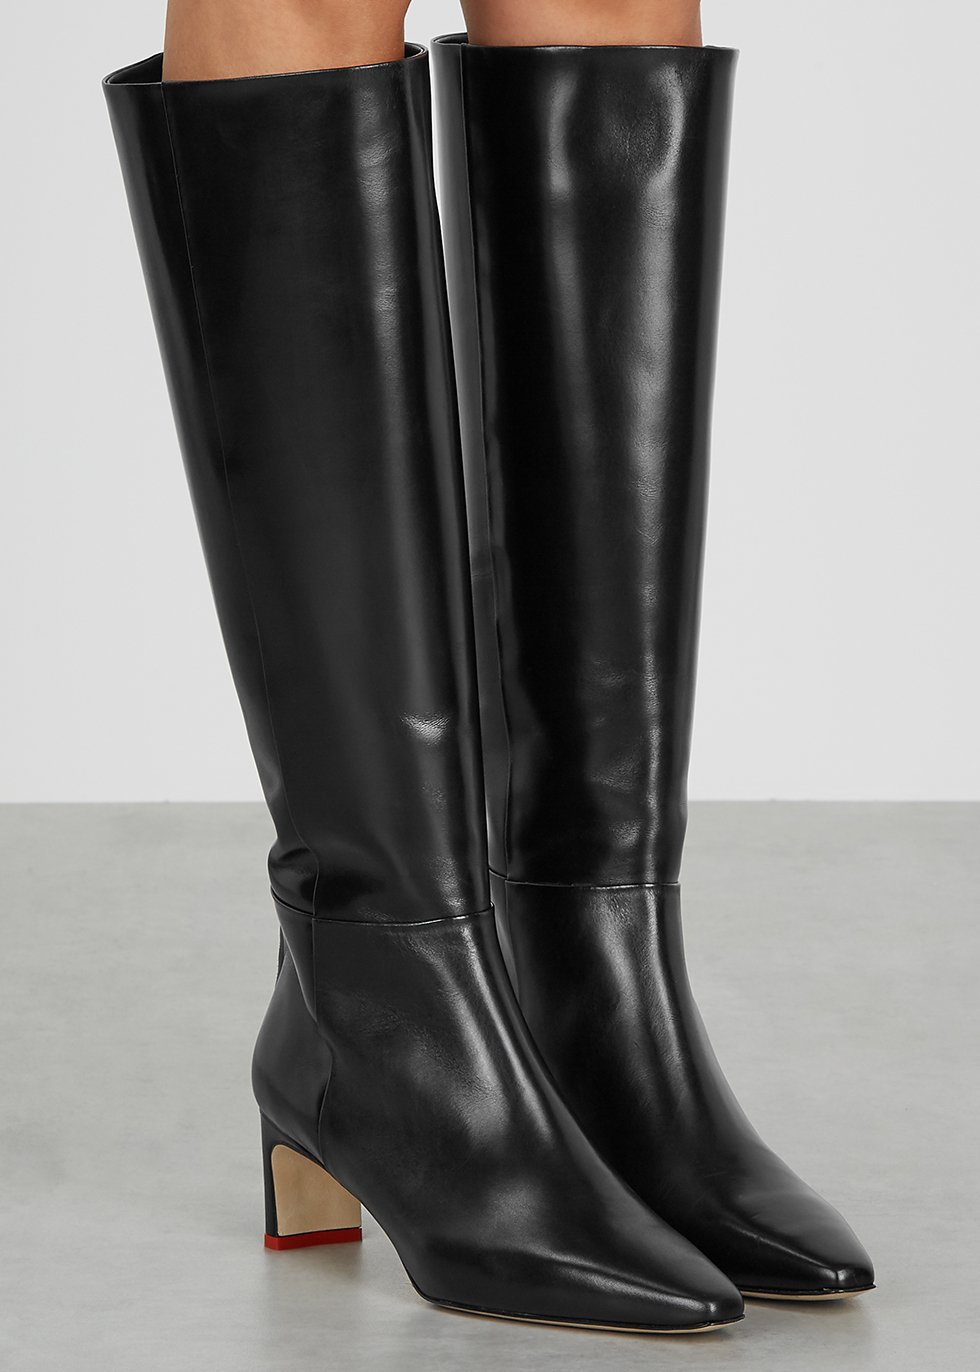 real leather knee high boots